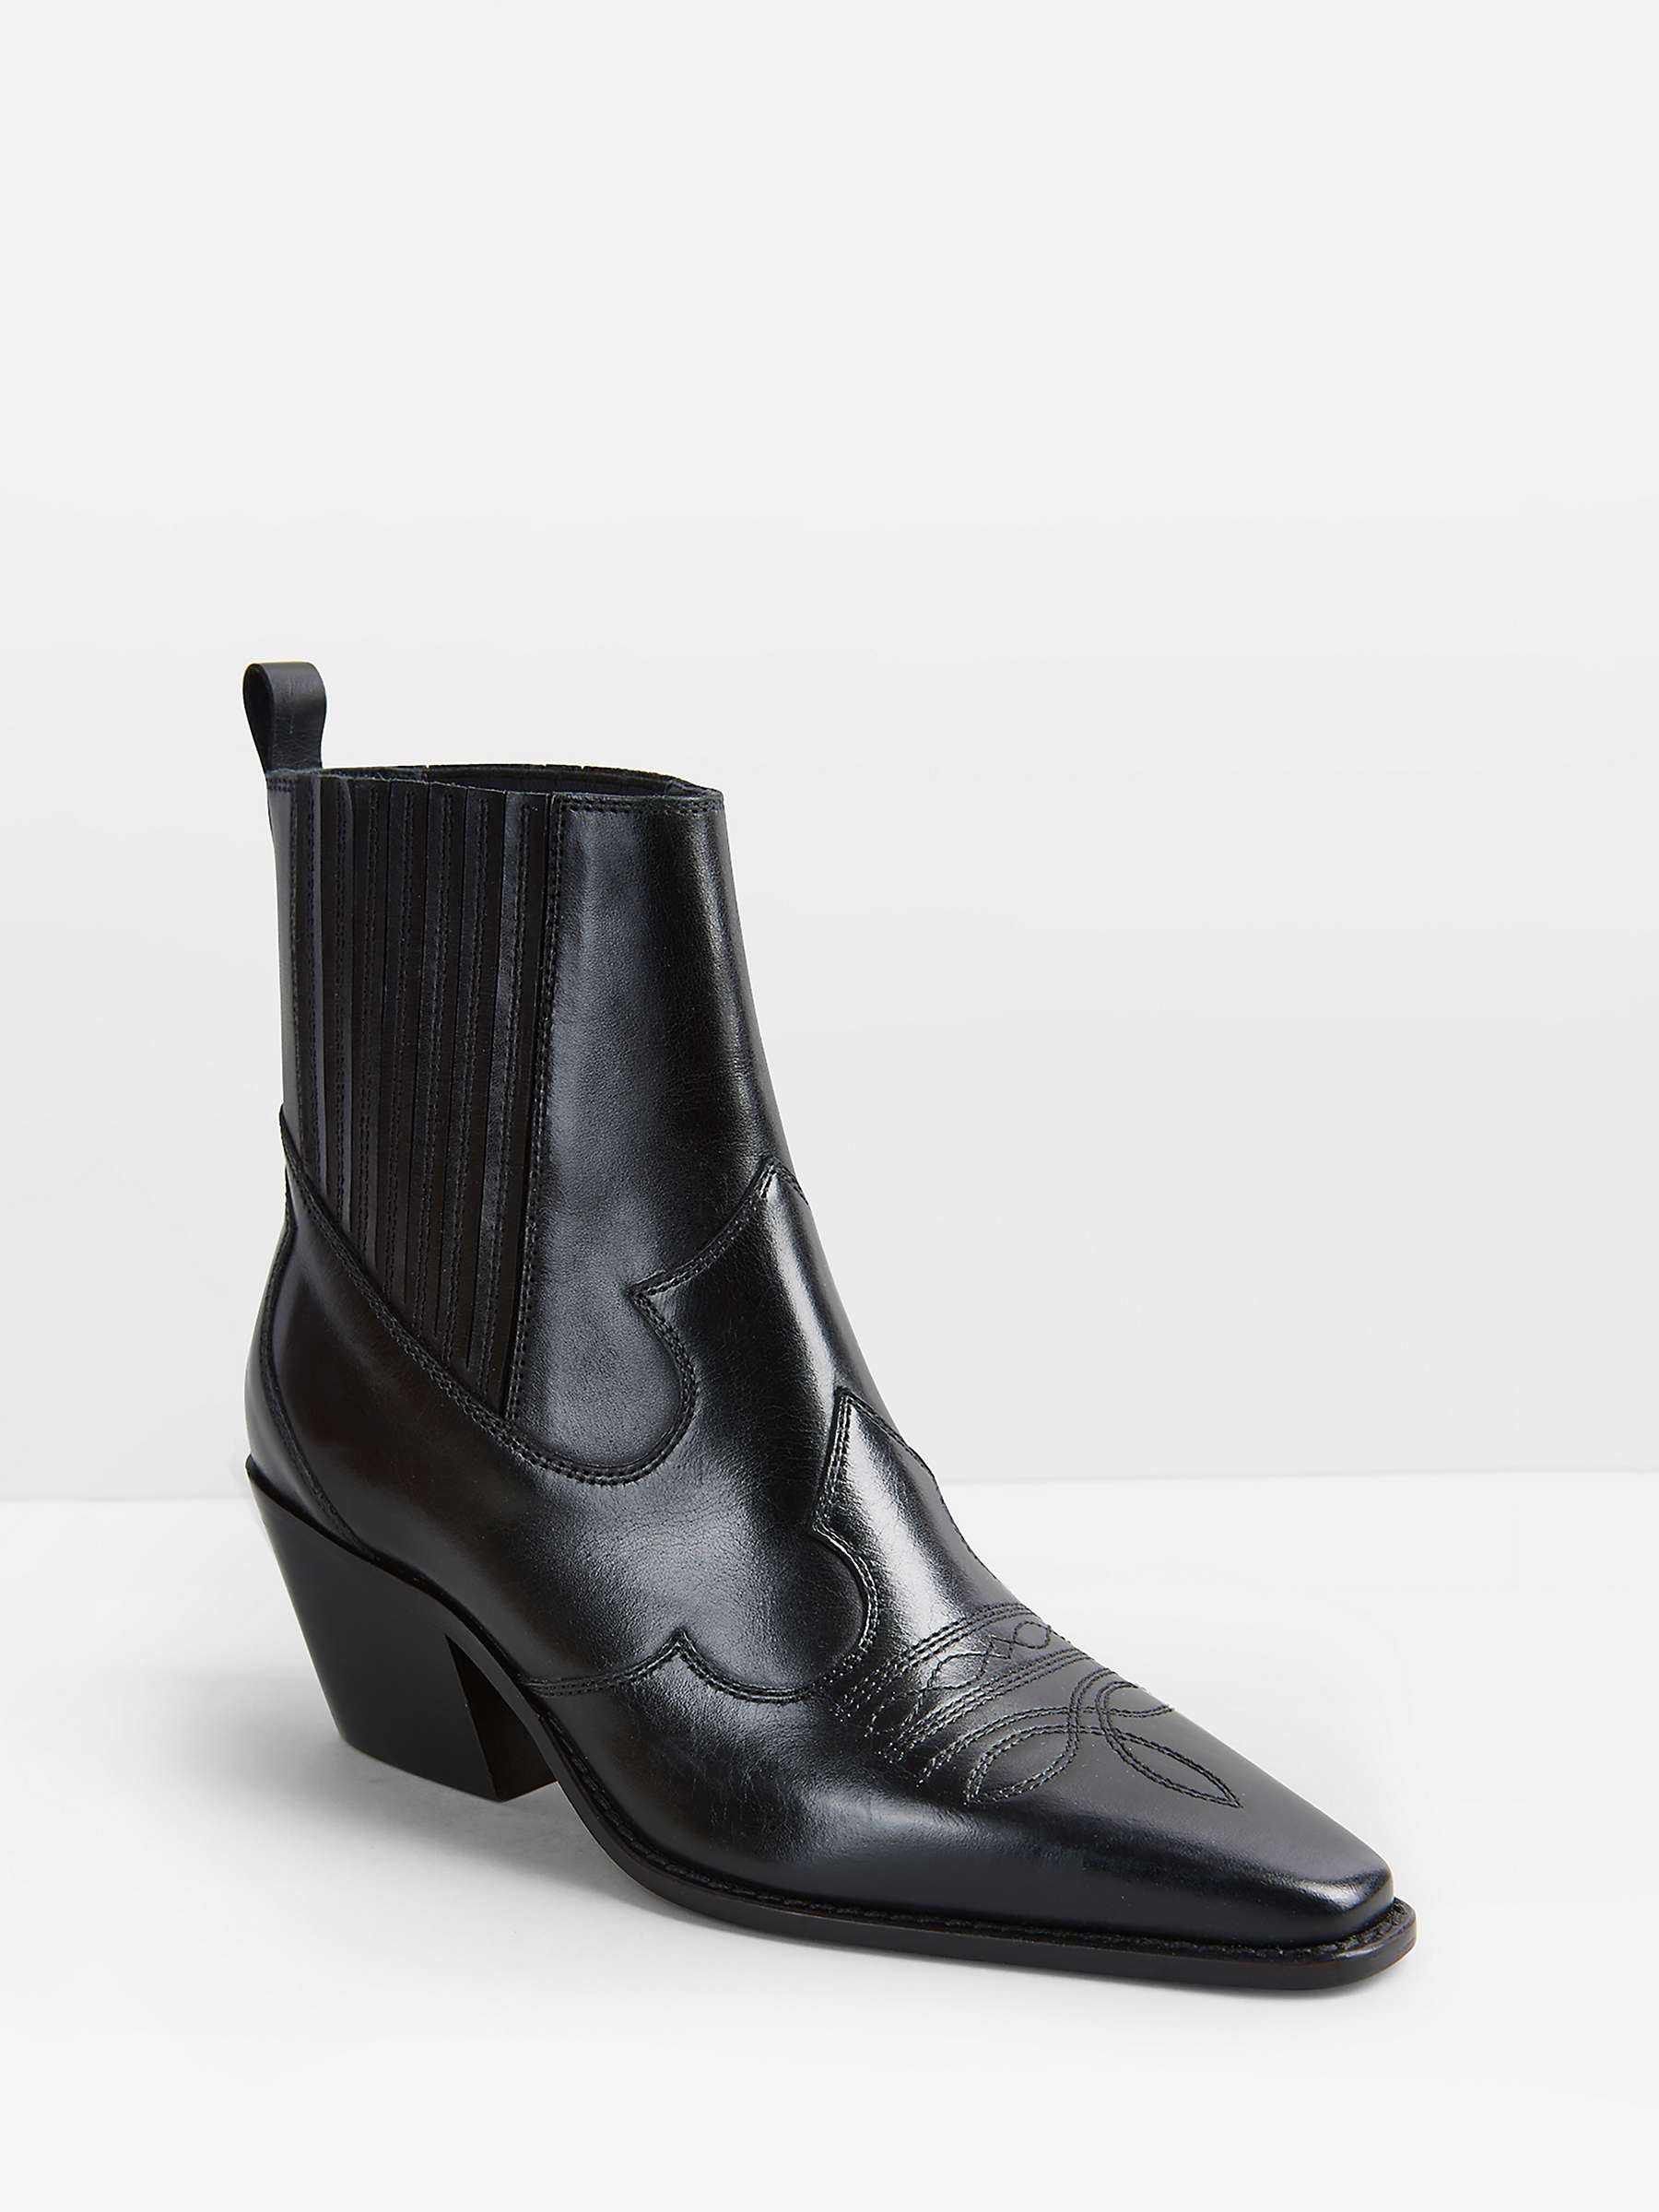 Buy HUSH Kendall Western Leather Boots, Black Online at johnlewis.com